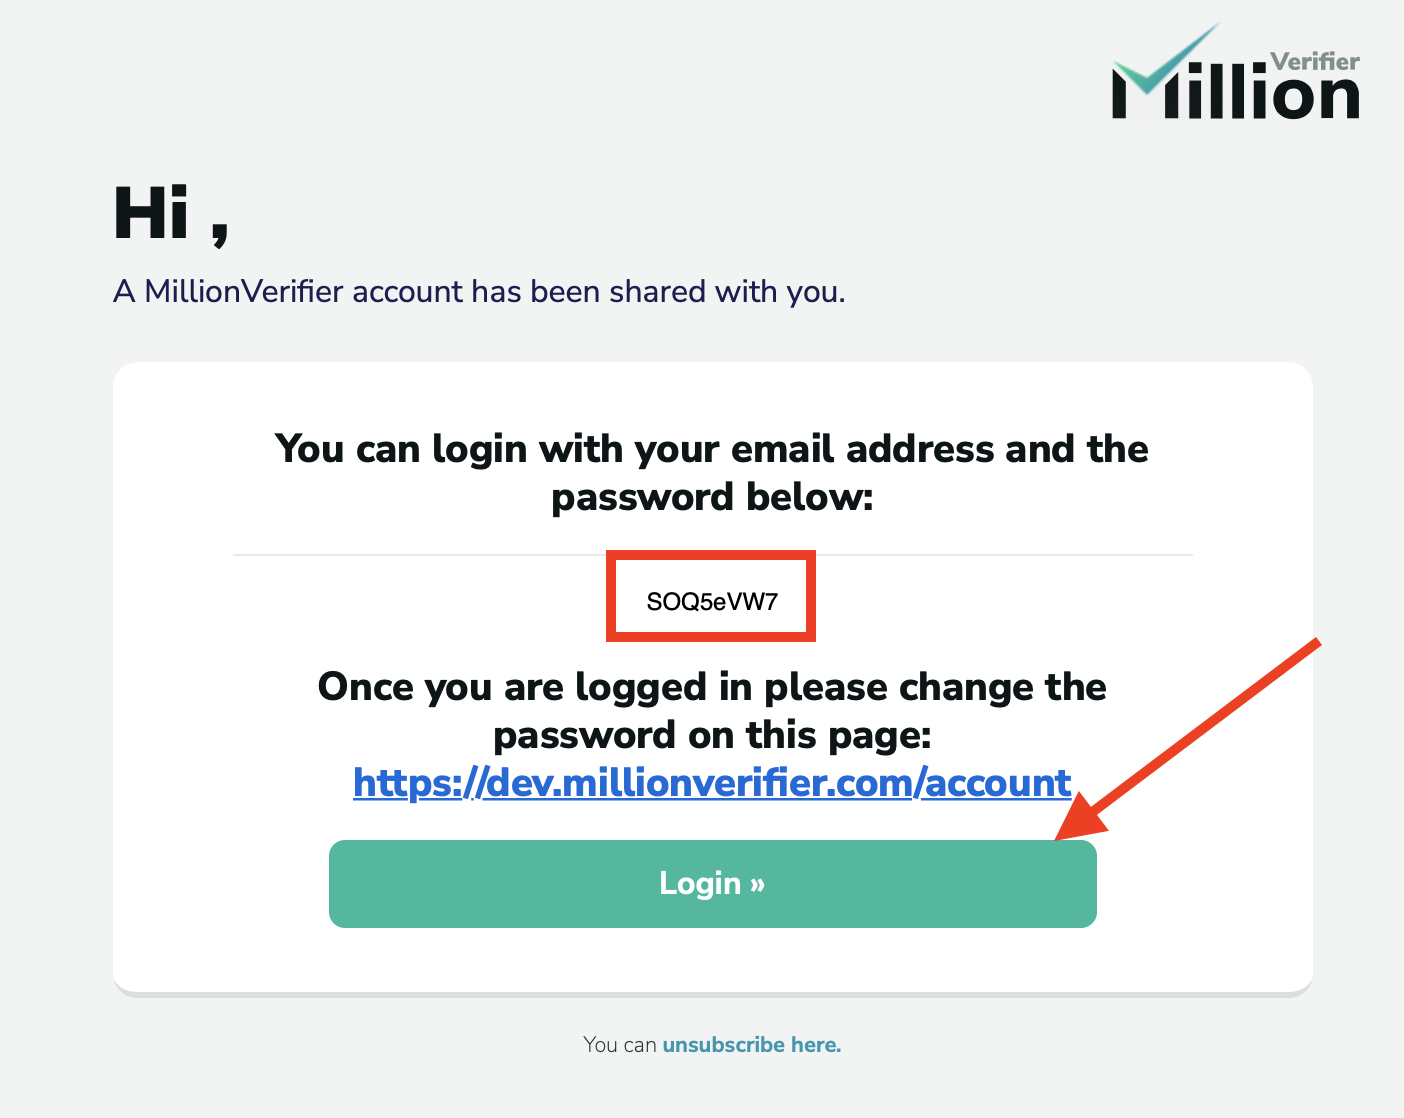 Subuser email with login password in MillionVerifier